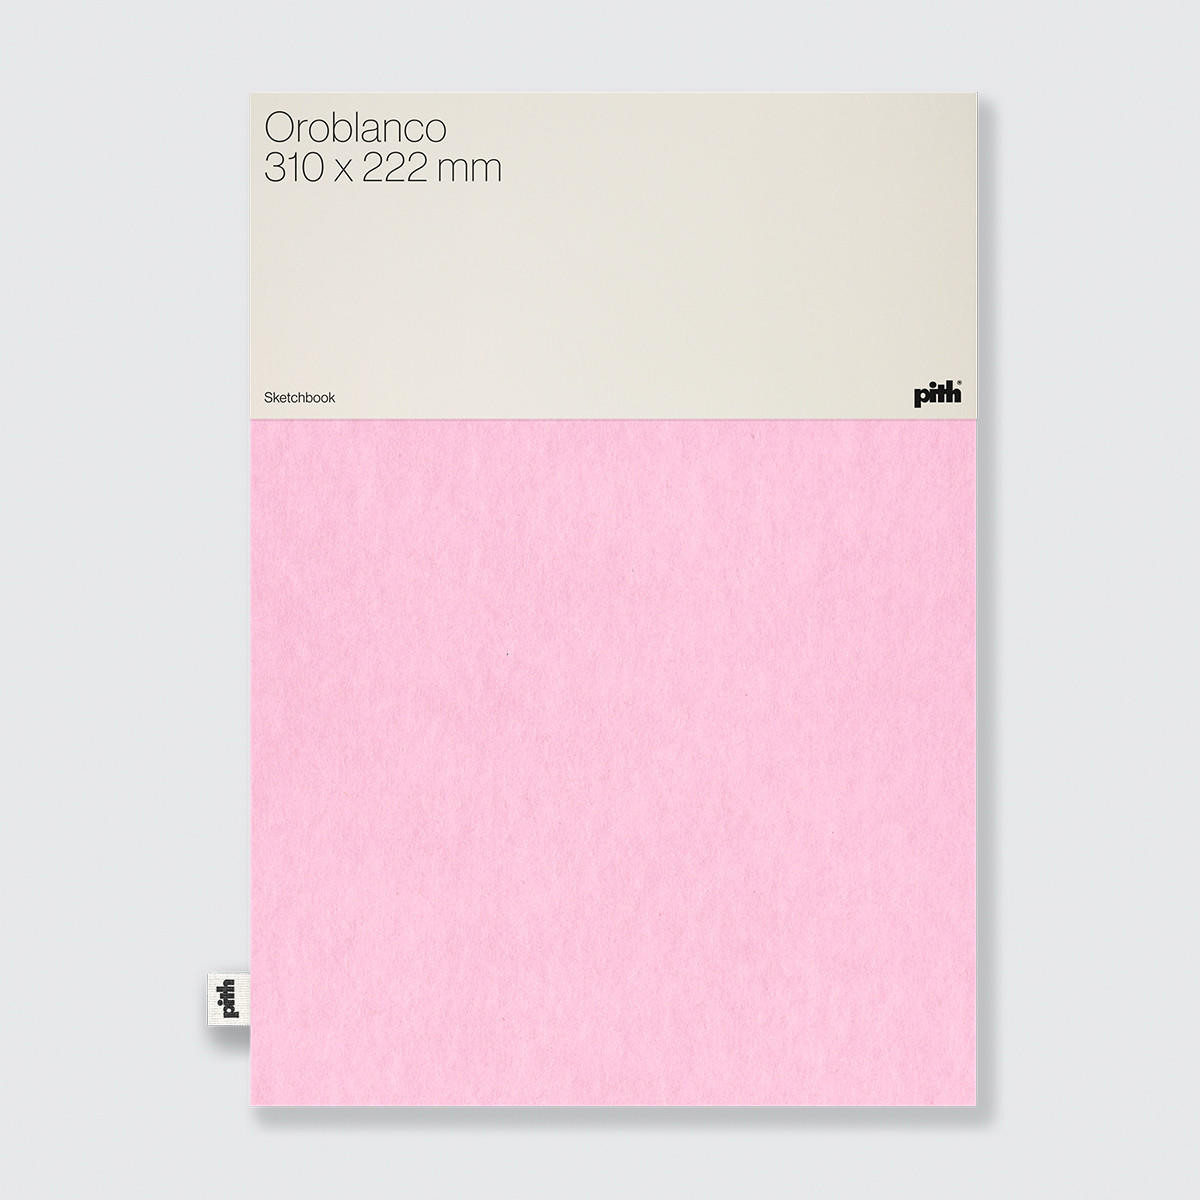 Pith Oroblanco Sketchbook 200gsm 76 Pages 310 X 222mm - Pink